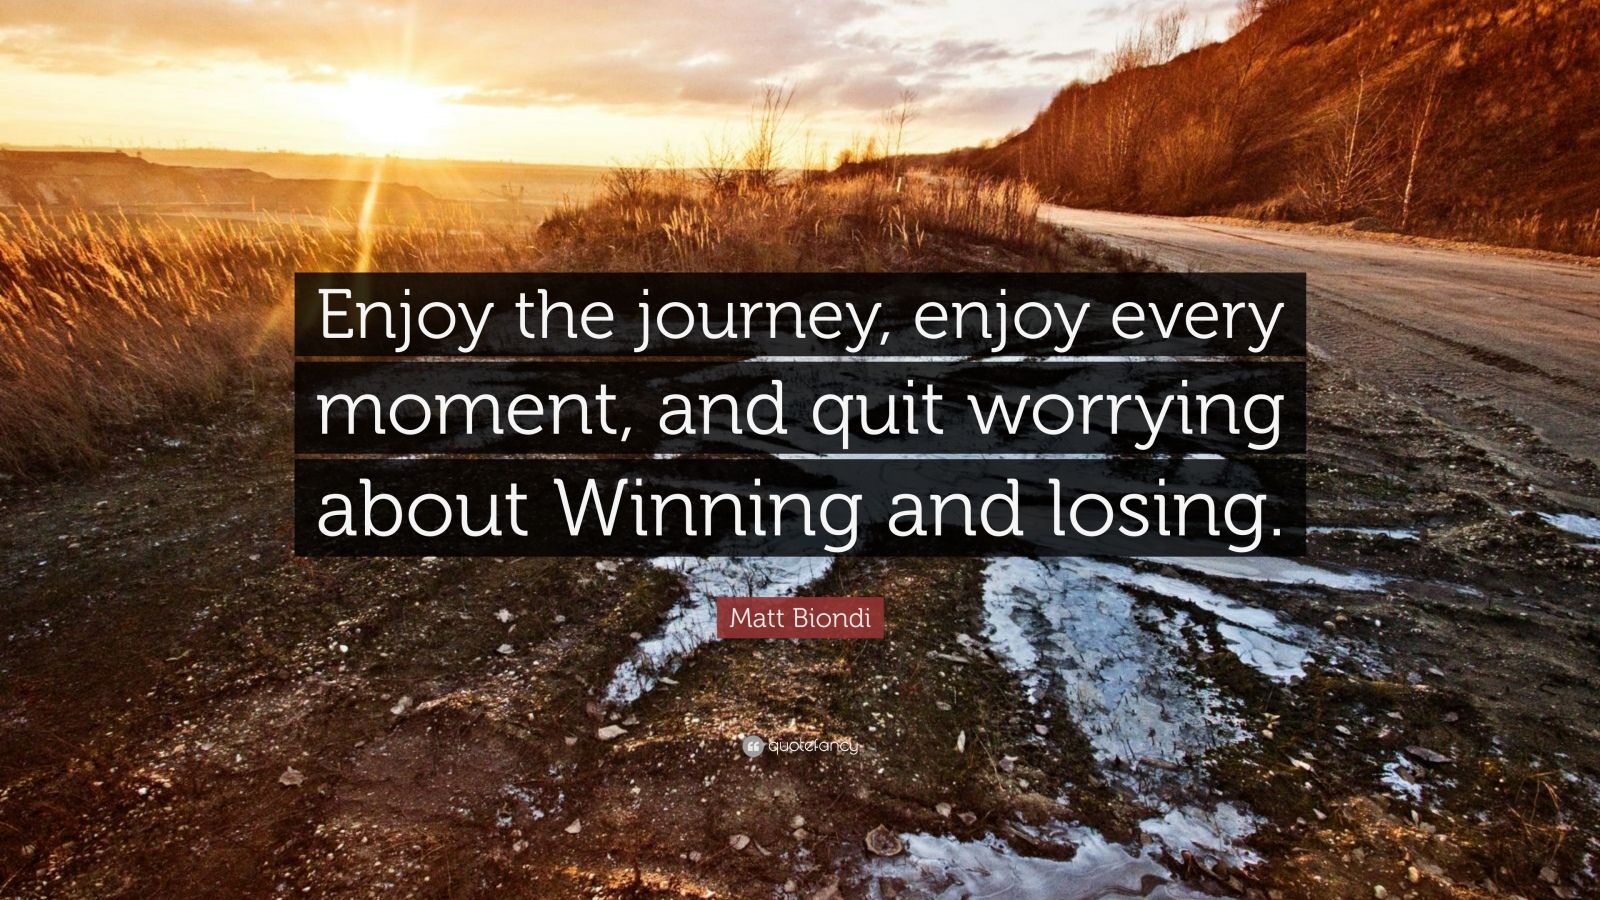 enjoy every moment of the journey